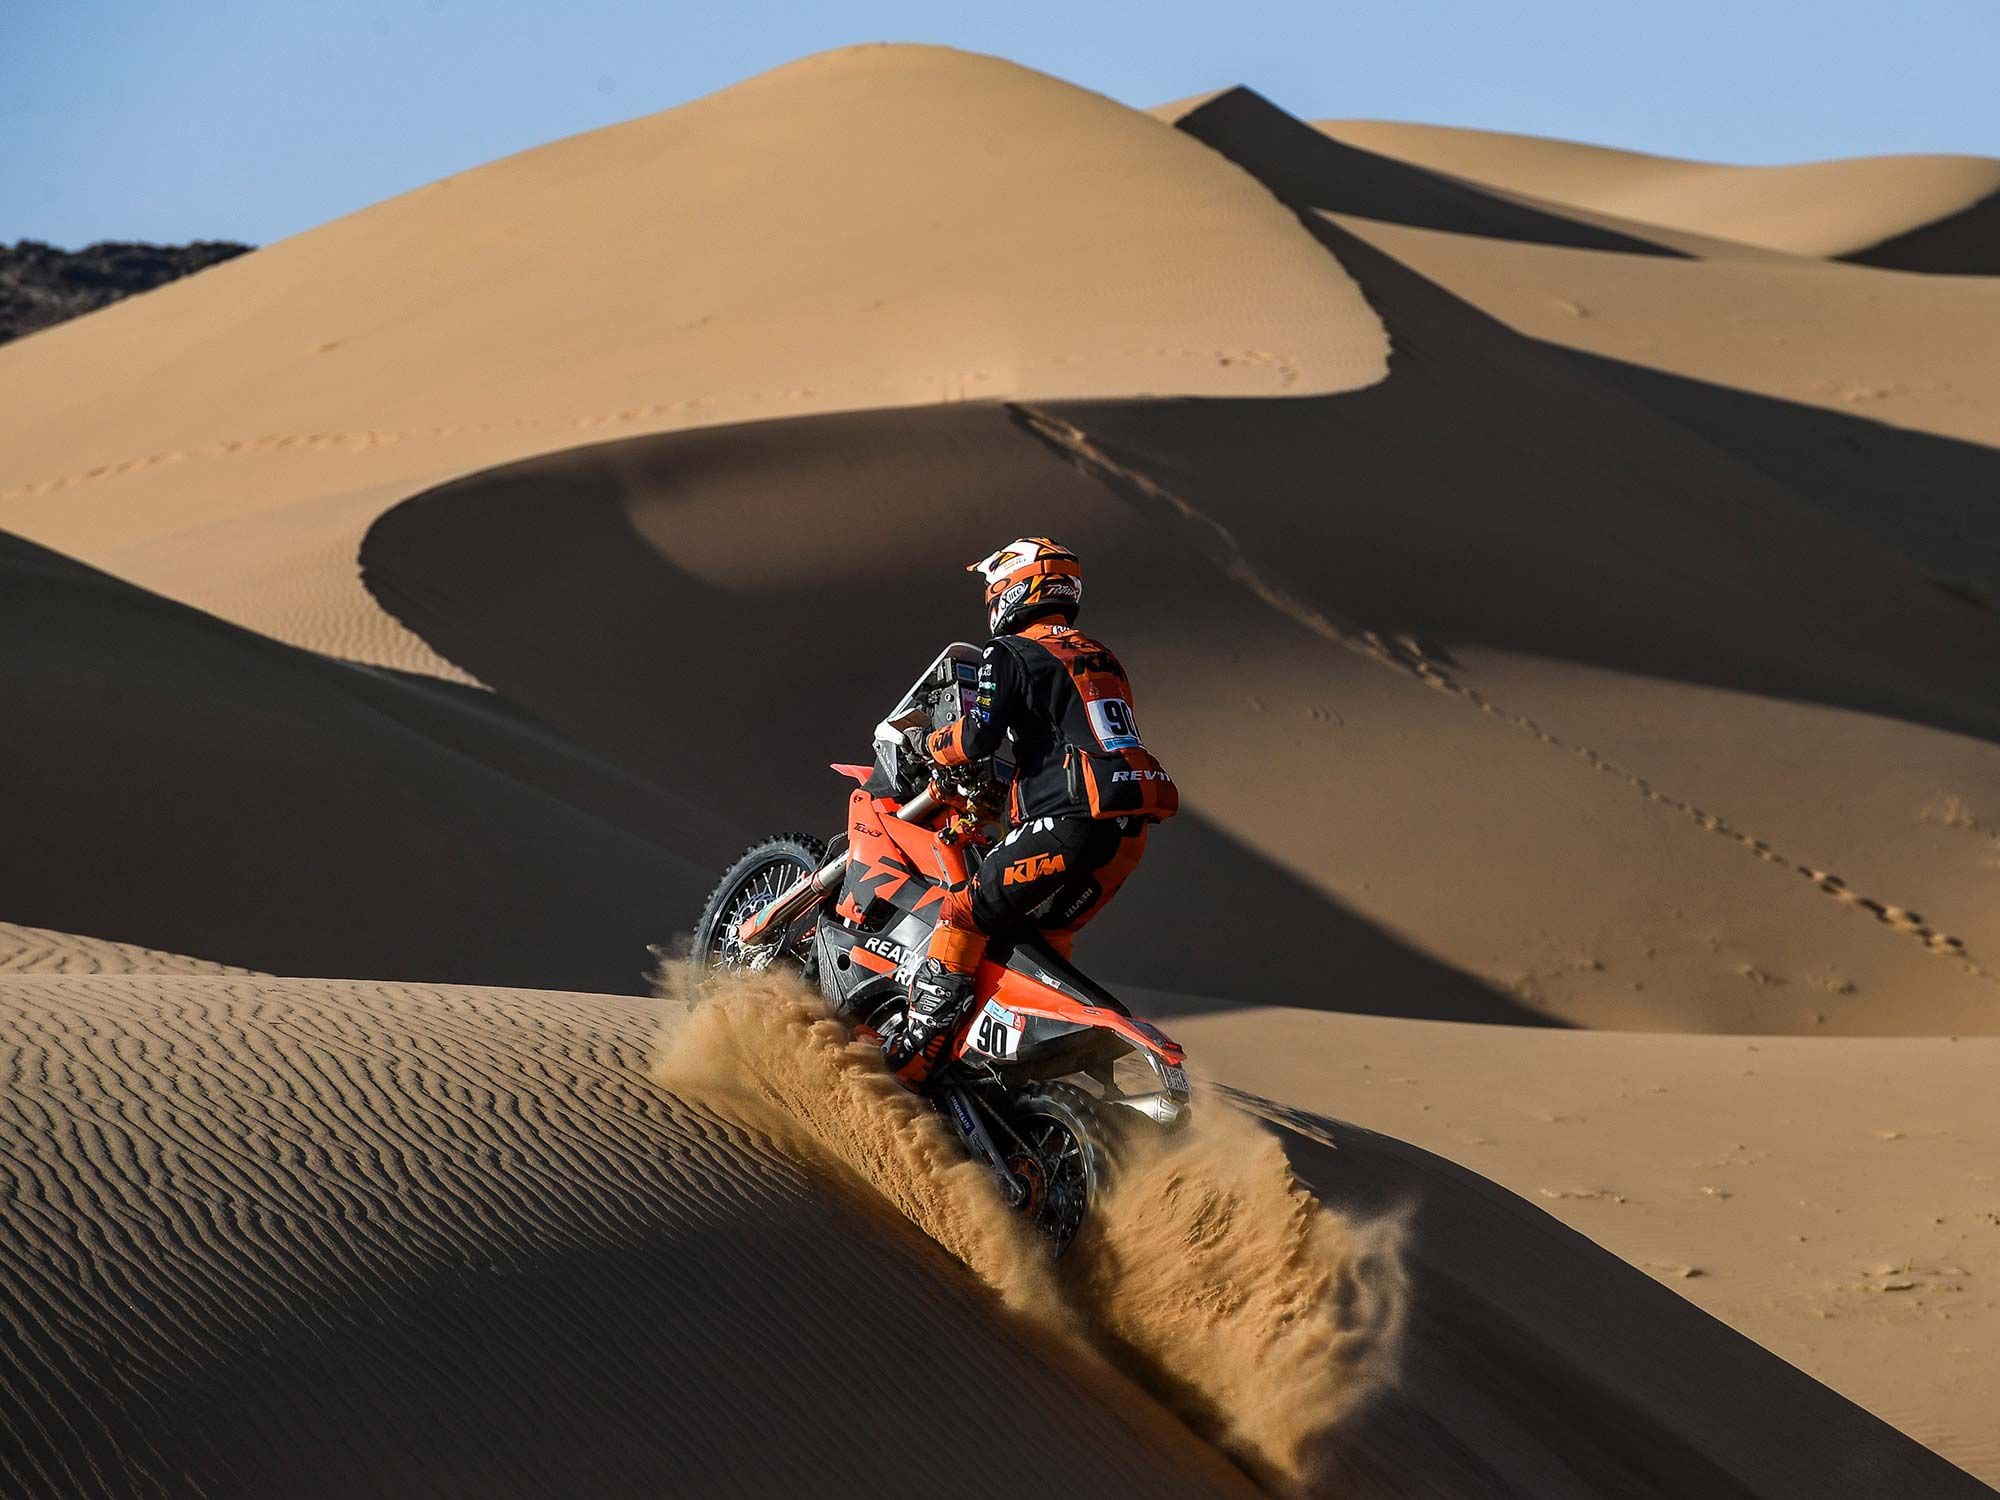 Dakar is over and now it’s time for Petrucci to focus on his new American adventure.